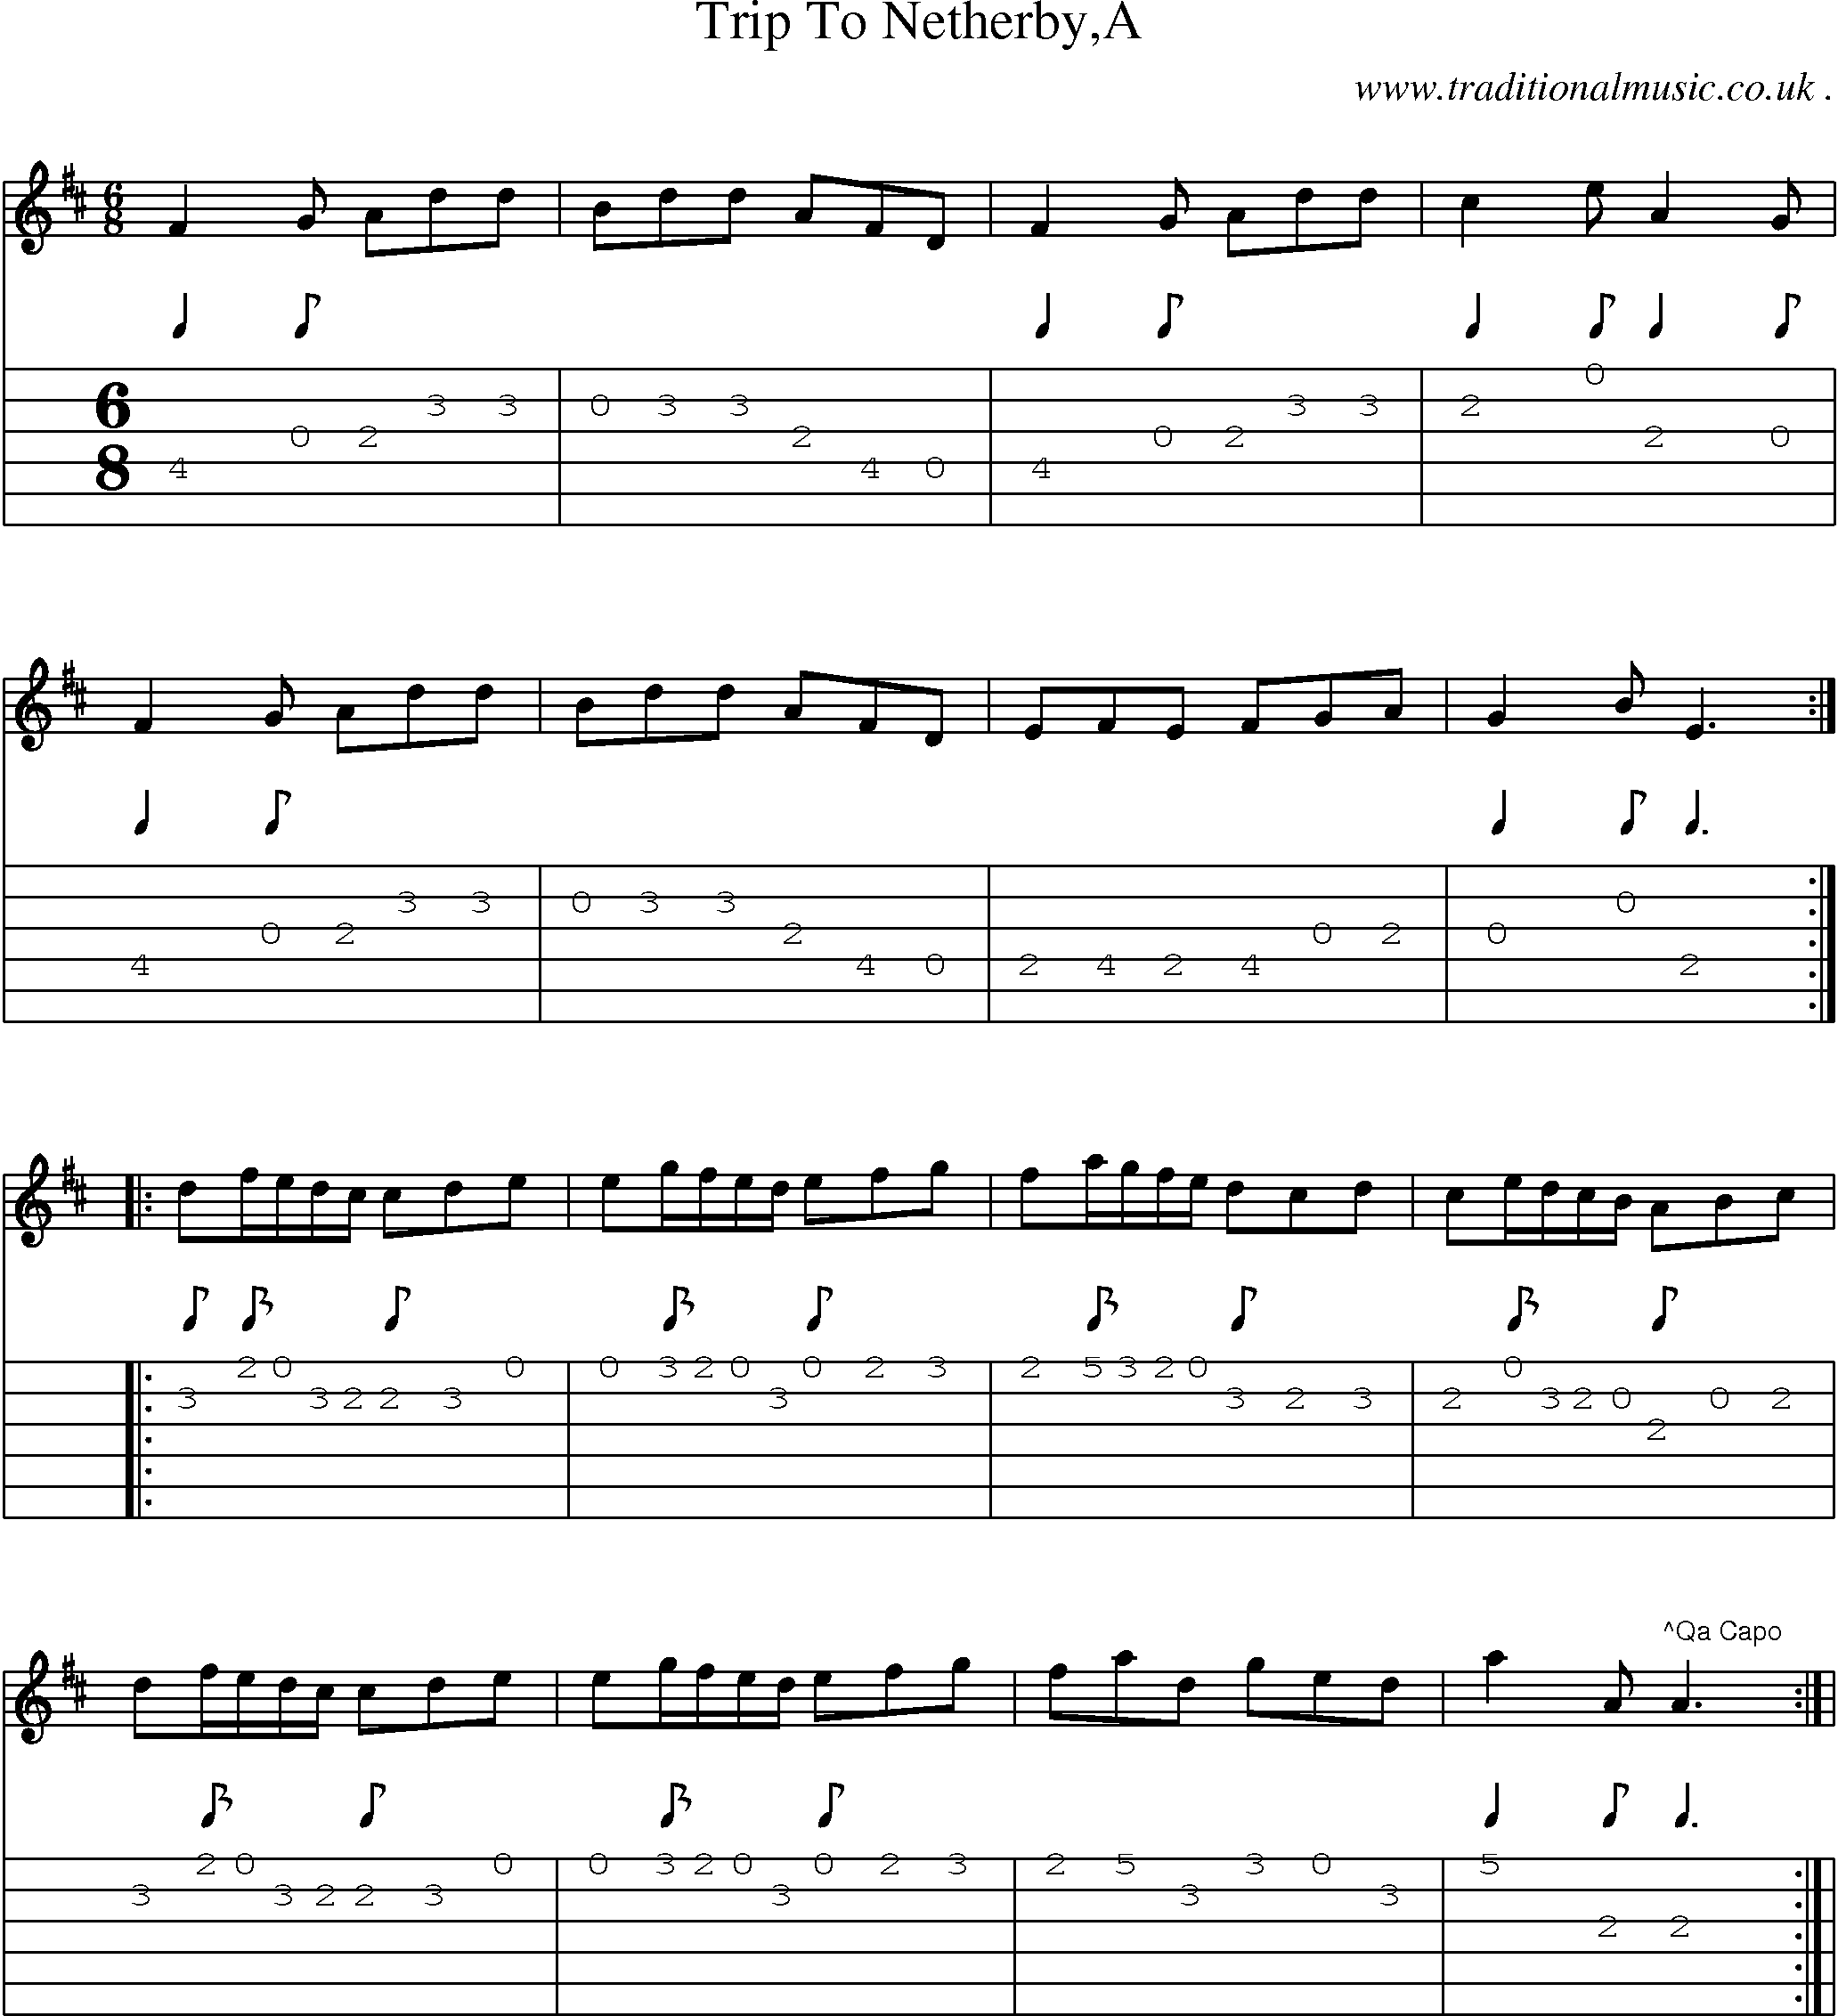 Sheet-Music and Guitar Tabs for Trip To Netherbya